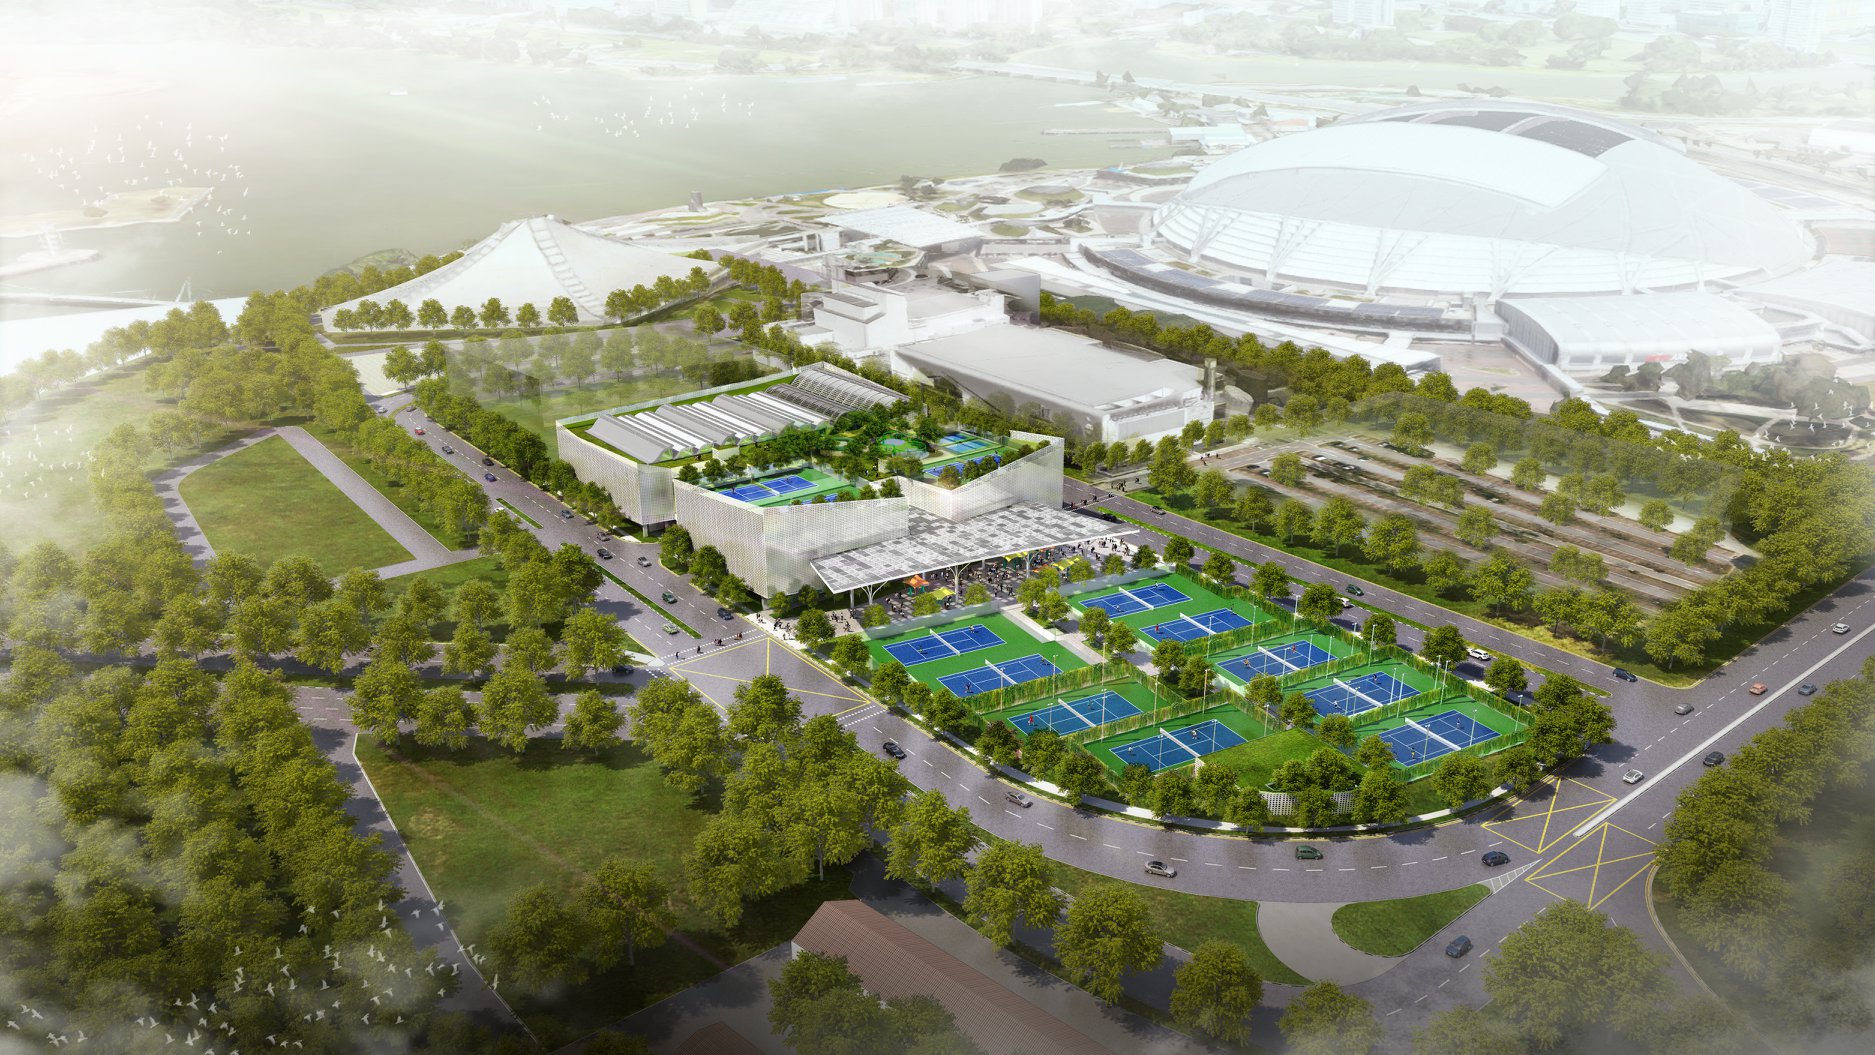 (Artist's impression of an aerial view of the future Kallang Tennis Centre)